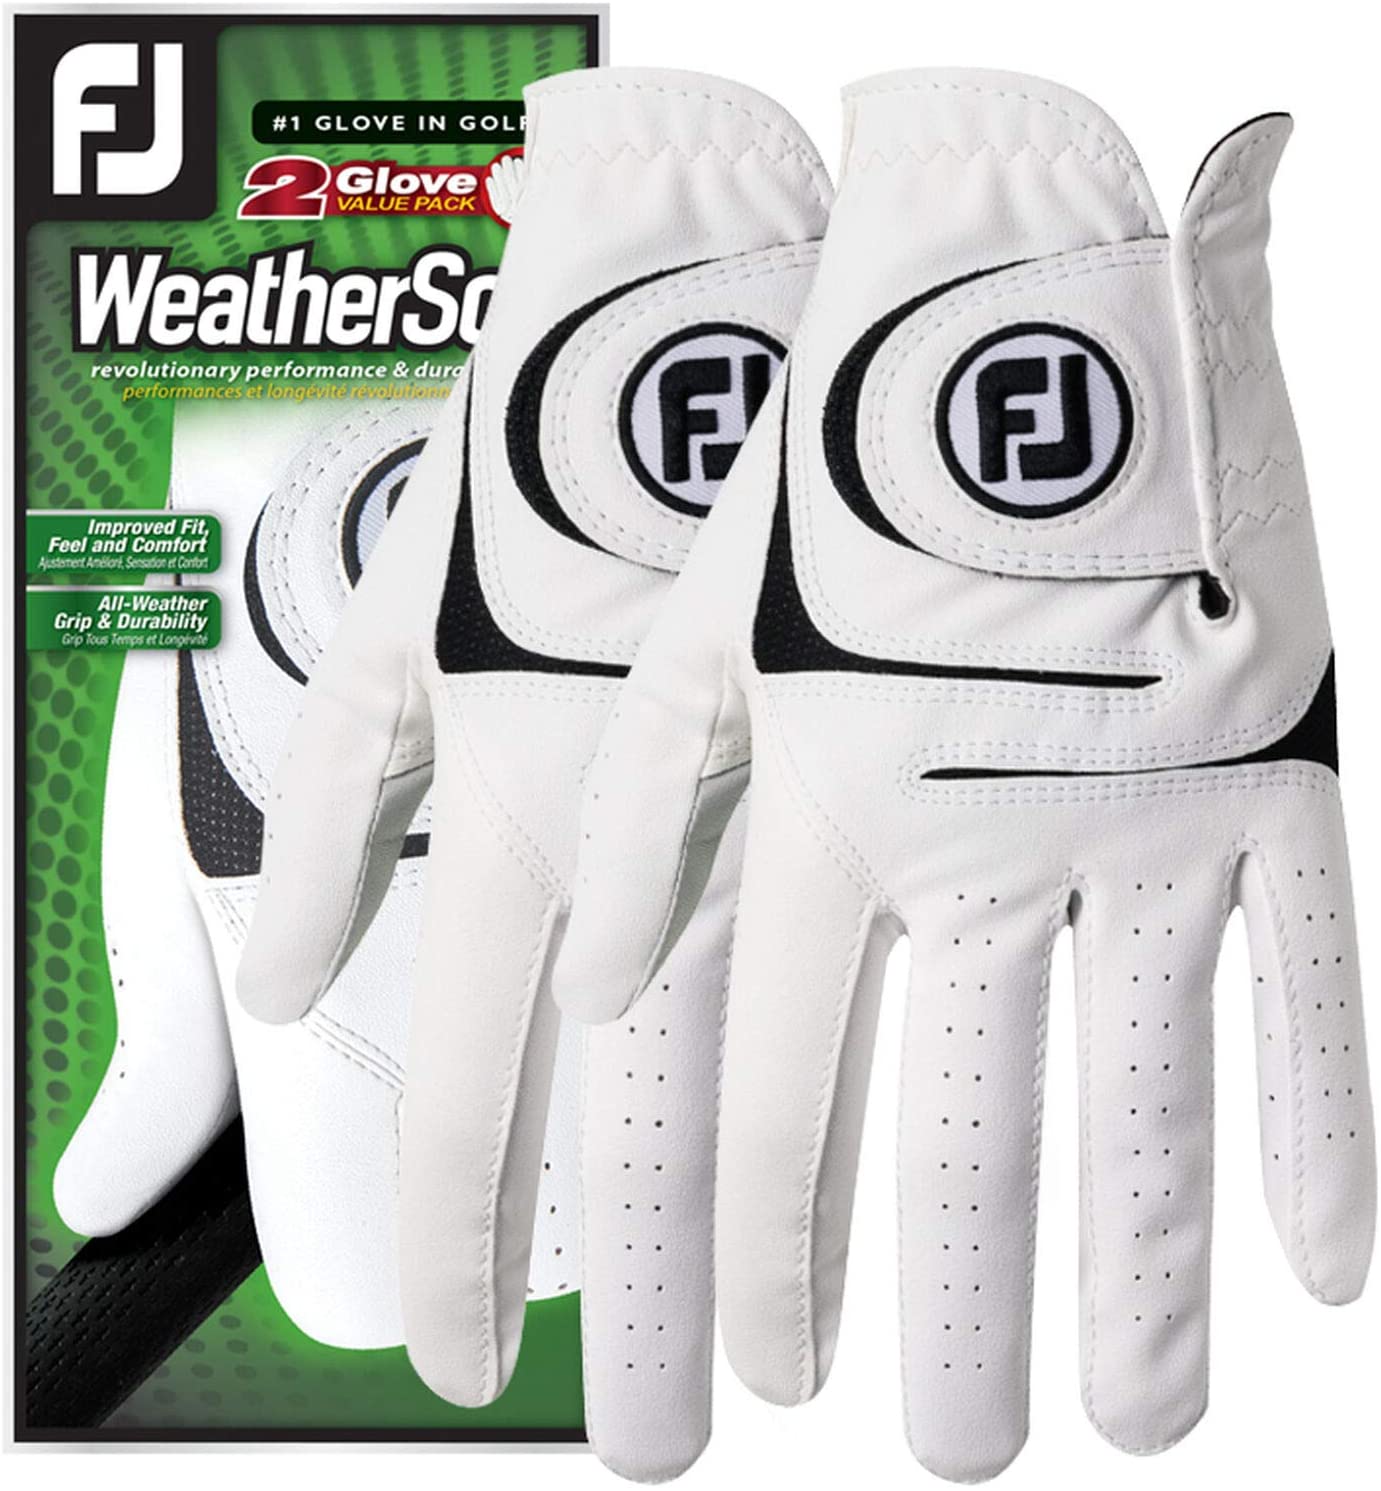 FootJoy Men's WeatherSof Golf Glove - 2 Pack, XL, Left Handed, White - image 1 of 3